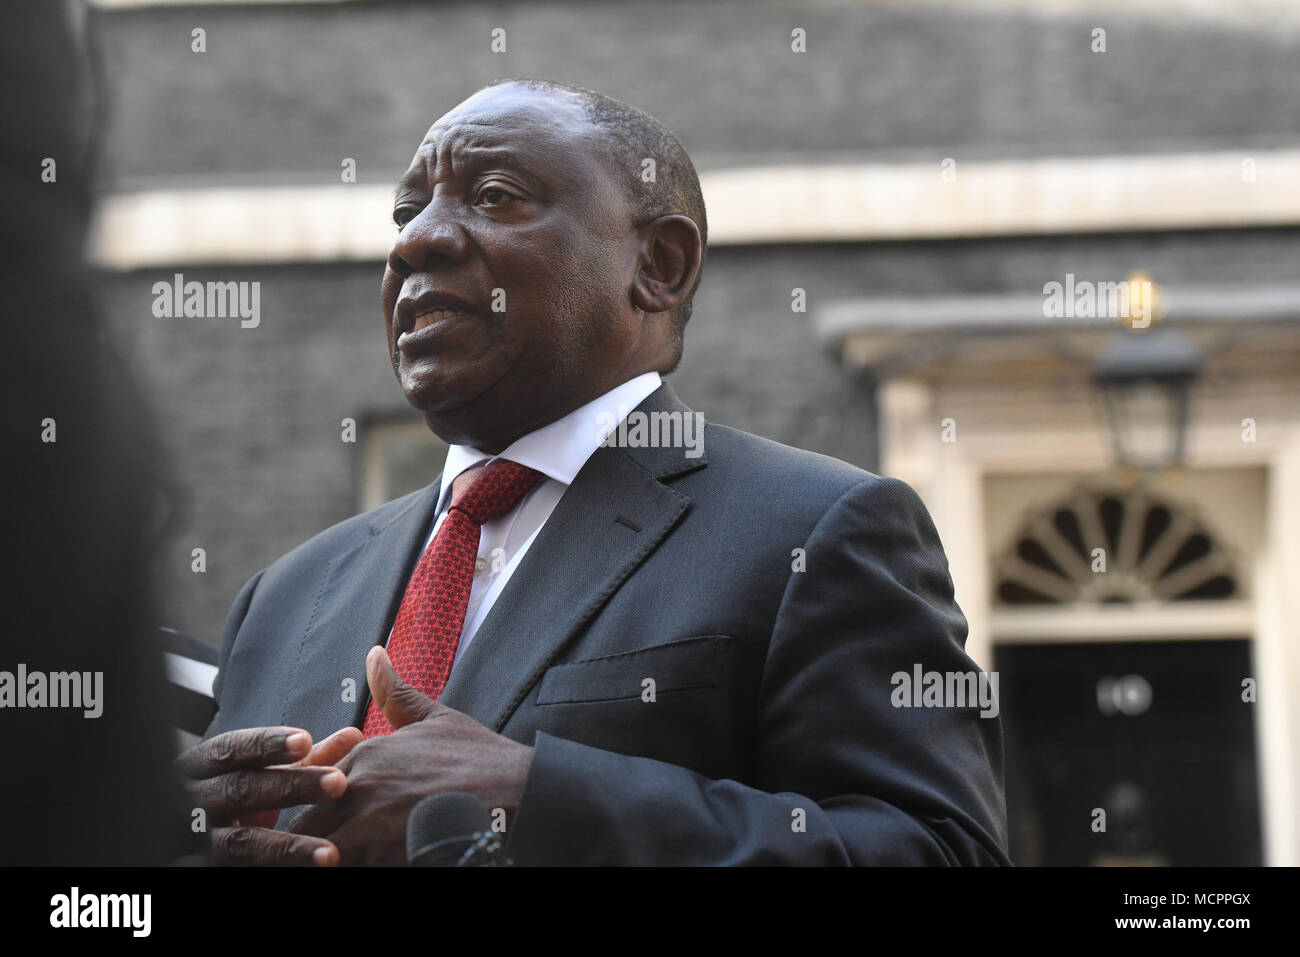 South African President Cyril Ramaphosa in Downing Street, London talks to the waiting media after having bilateral talk with Prime Minister Theresa May. Stock Photo